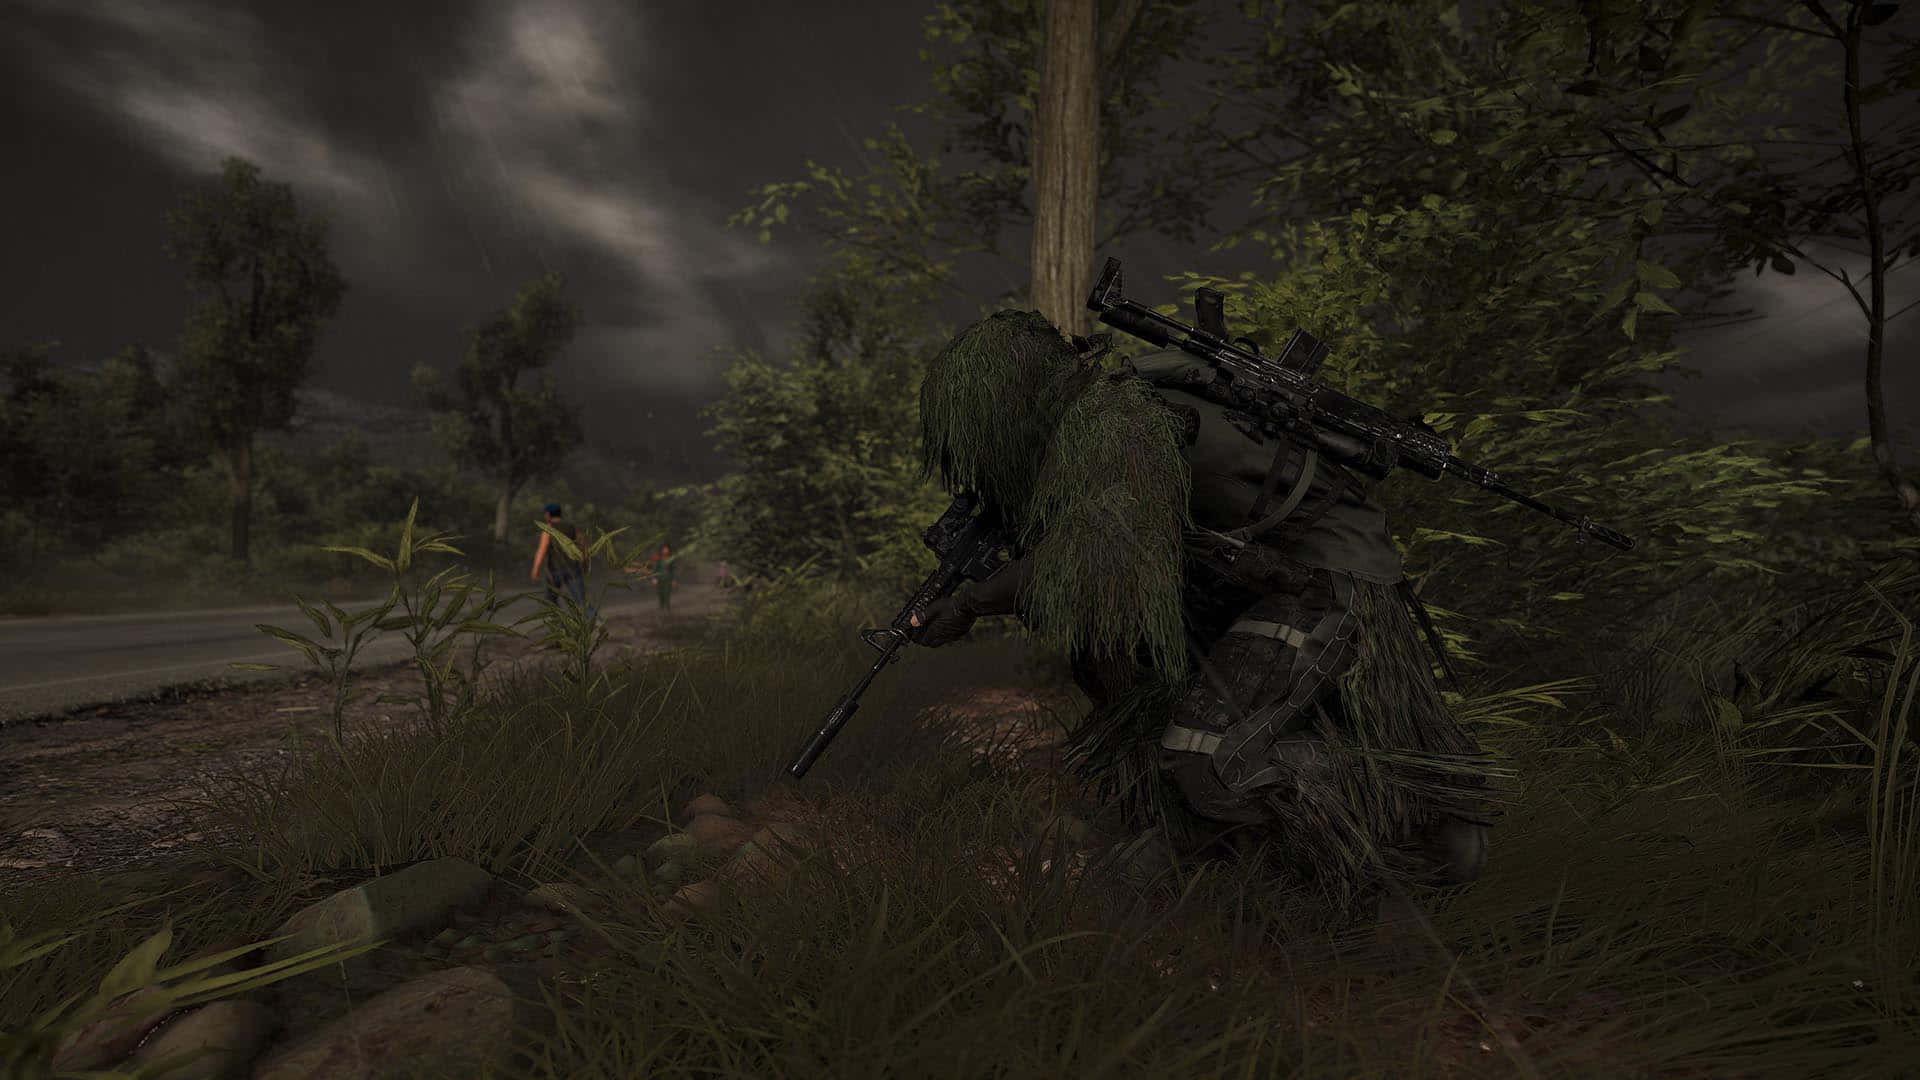 Hd Ghost Recon Wildlands Background Sneaking In A Ghillie Suit